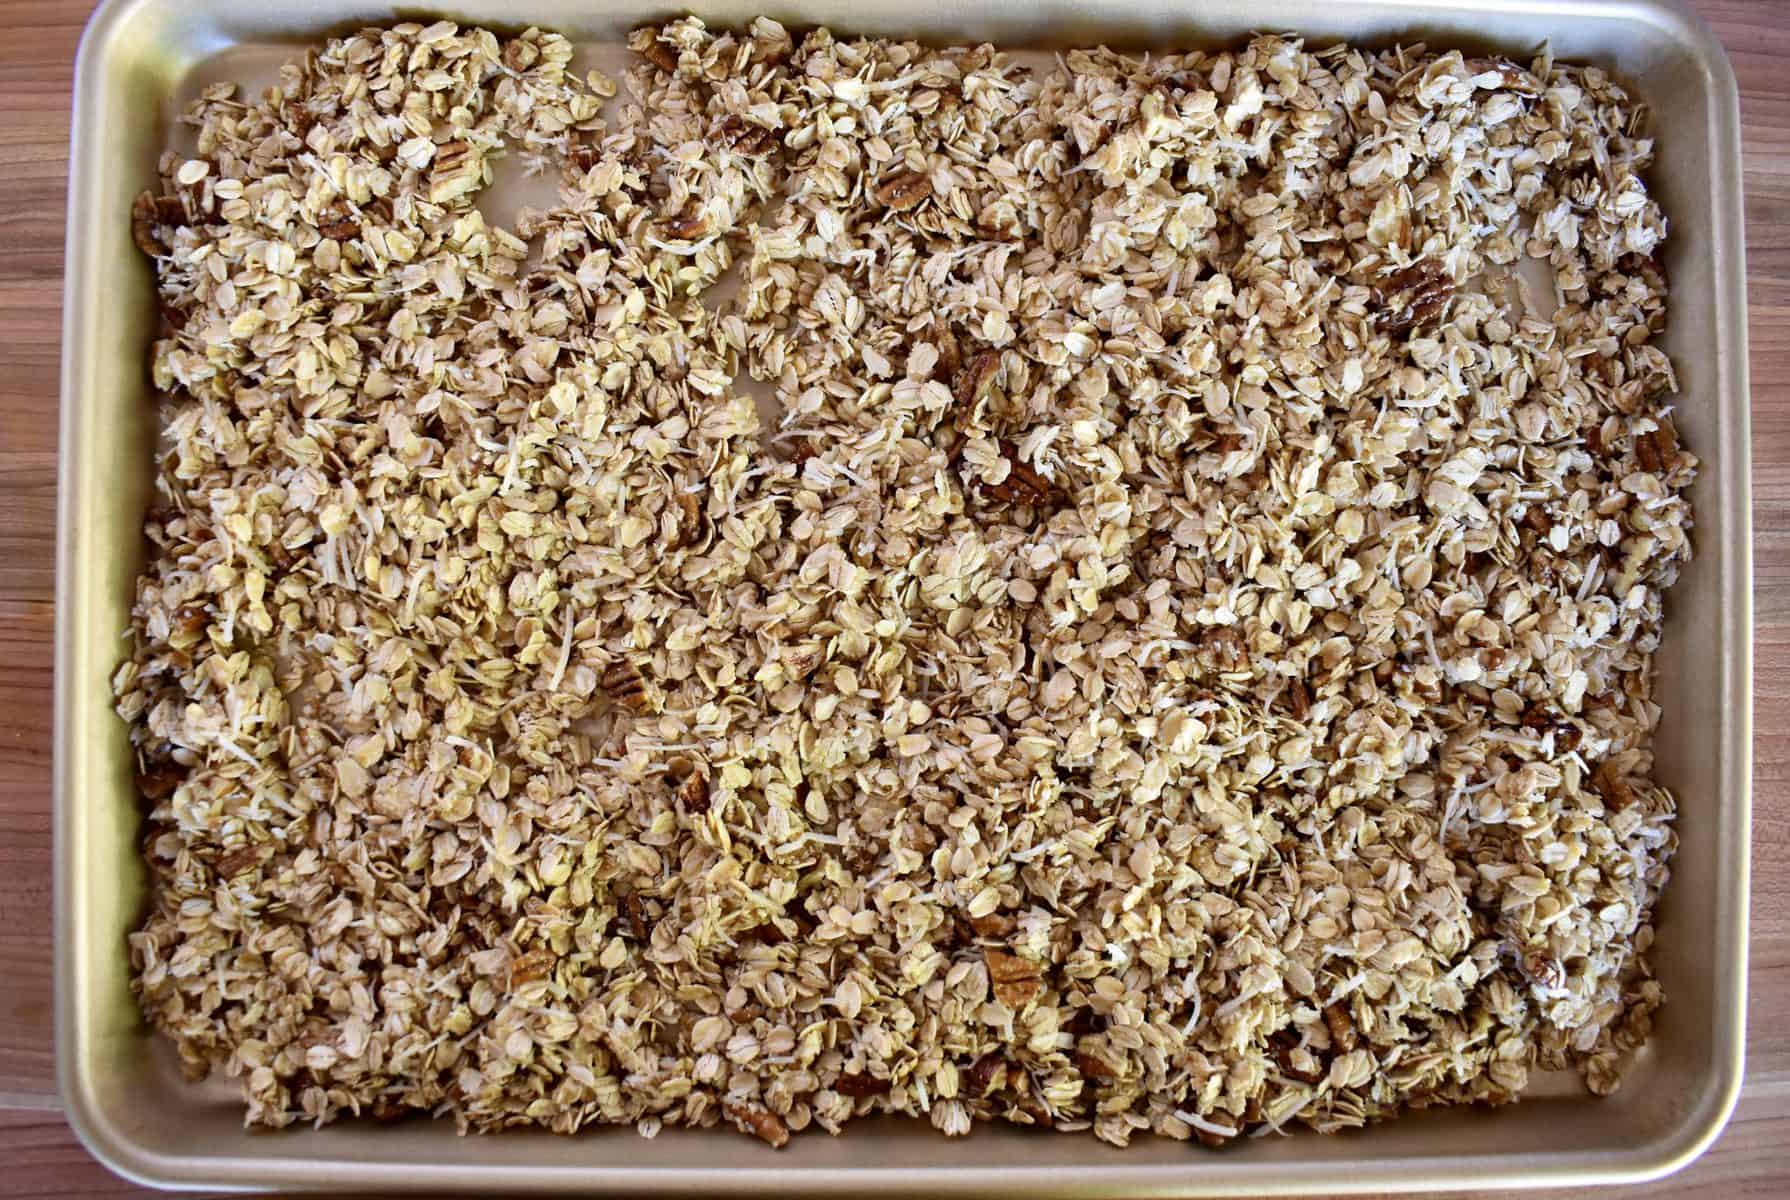 mixture spread evenly on a baking sheet. 